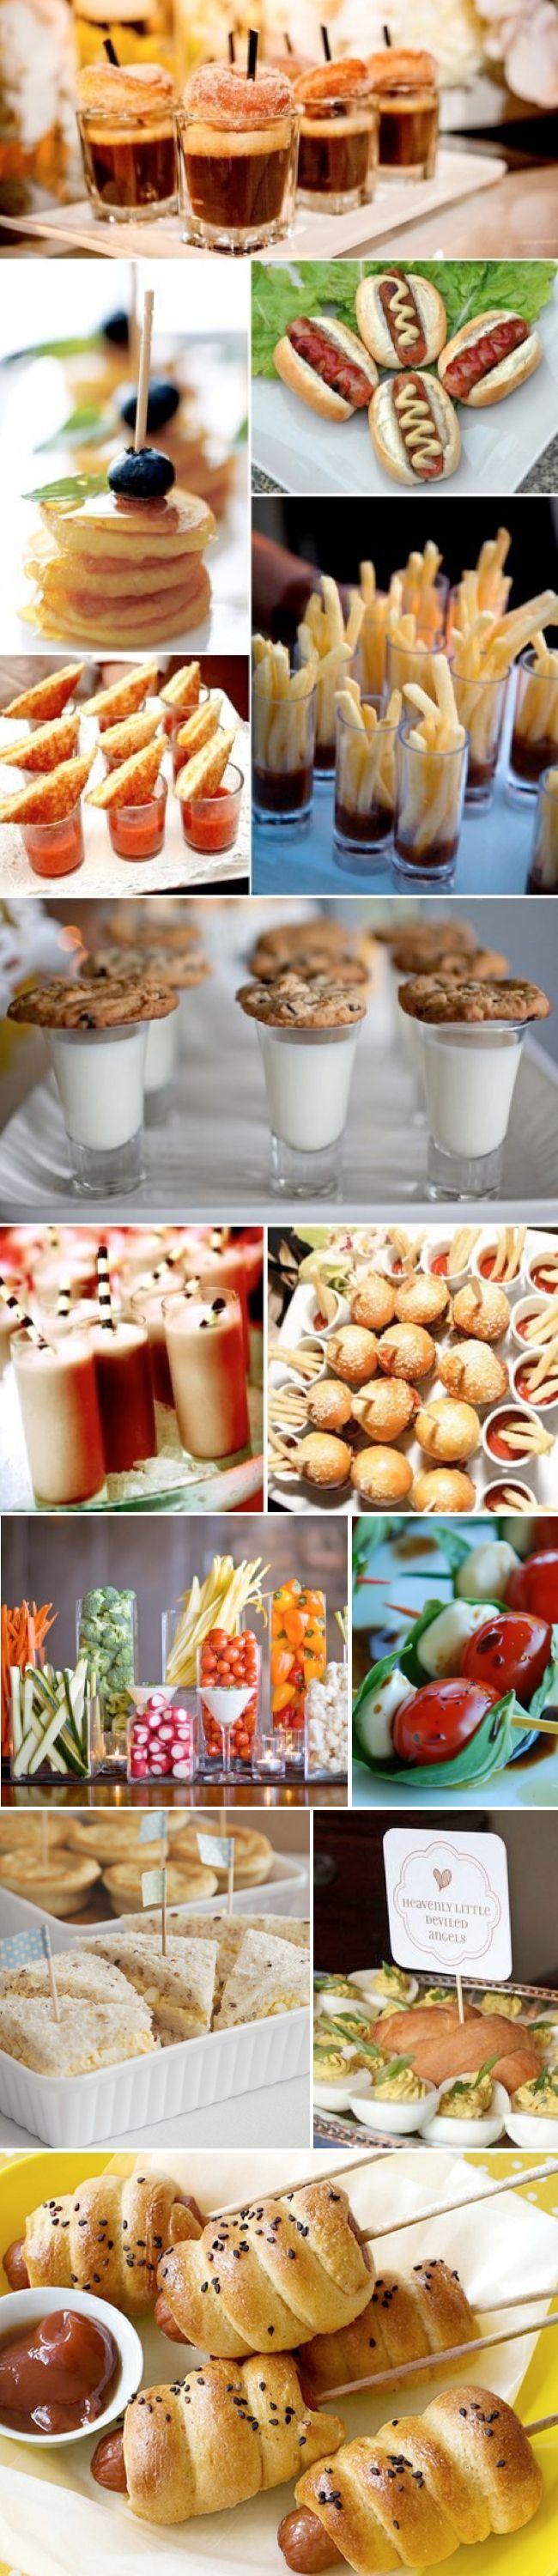 Hochzeit - Finger Foods For That Party You’ve Been Planning (38 Photos)